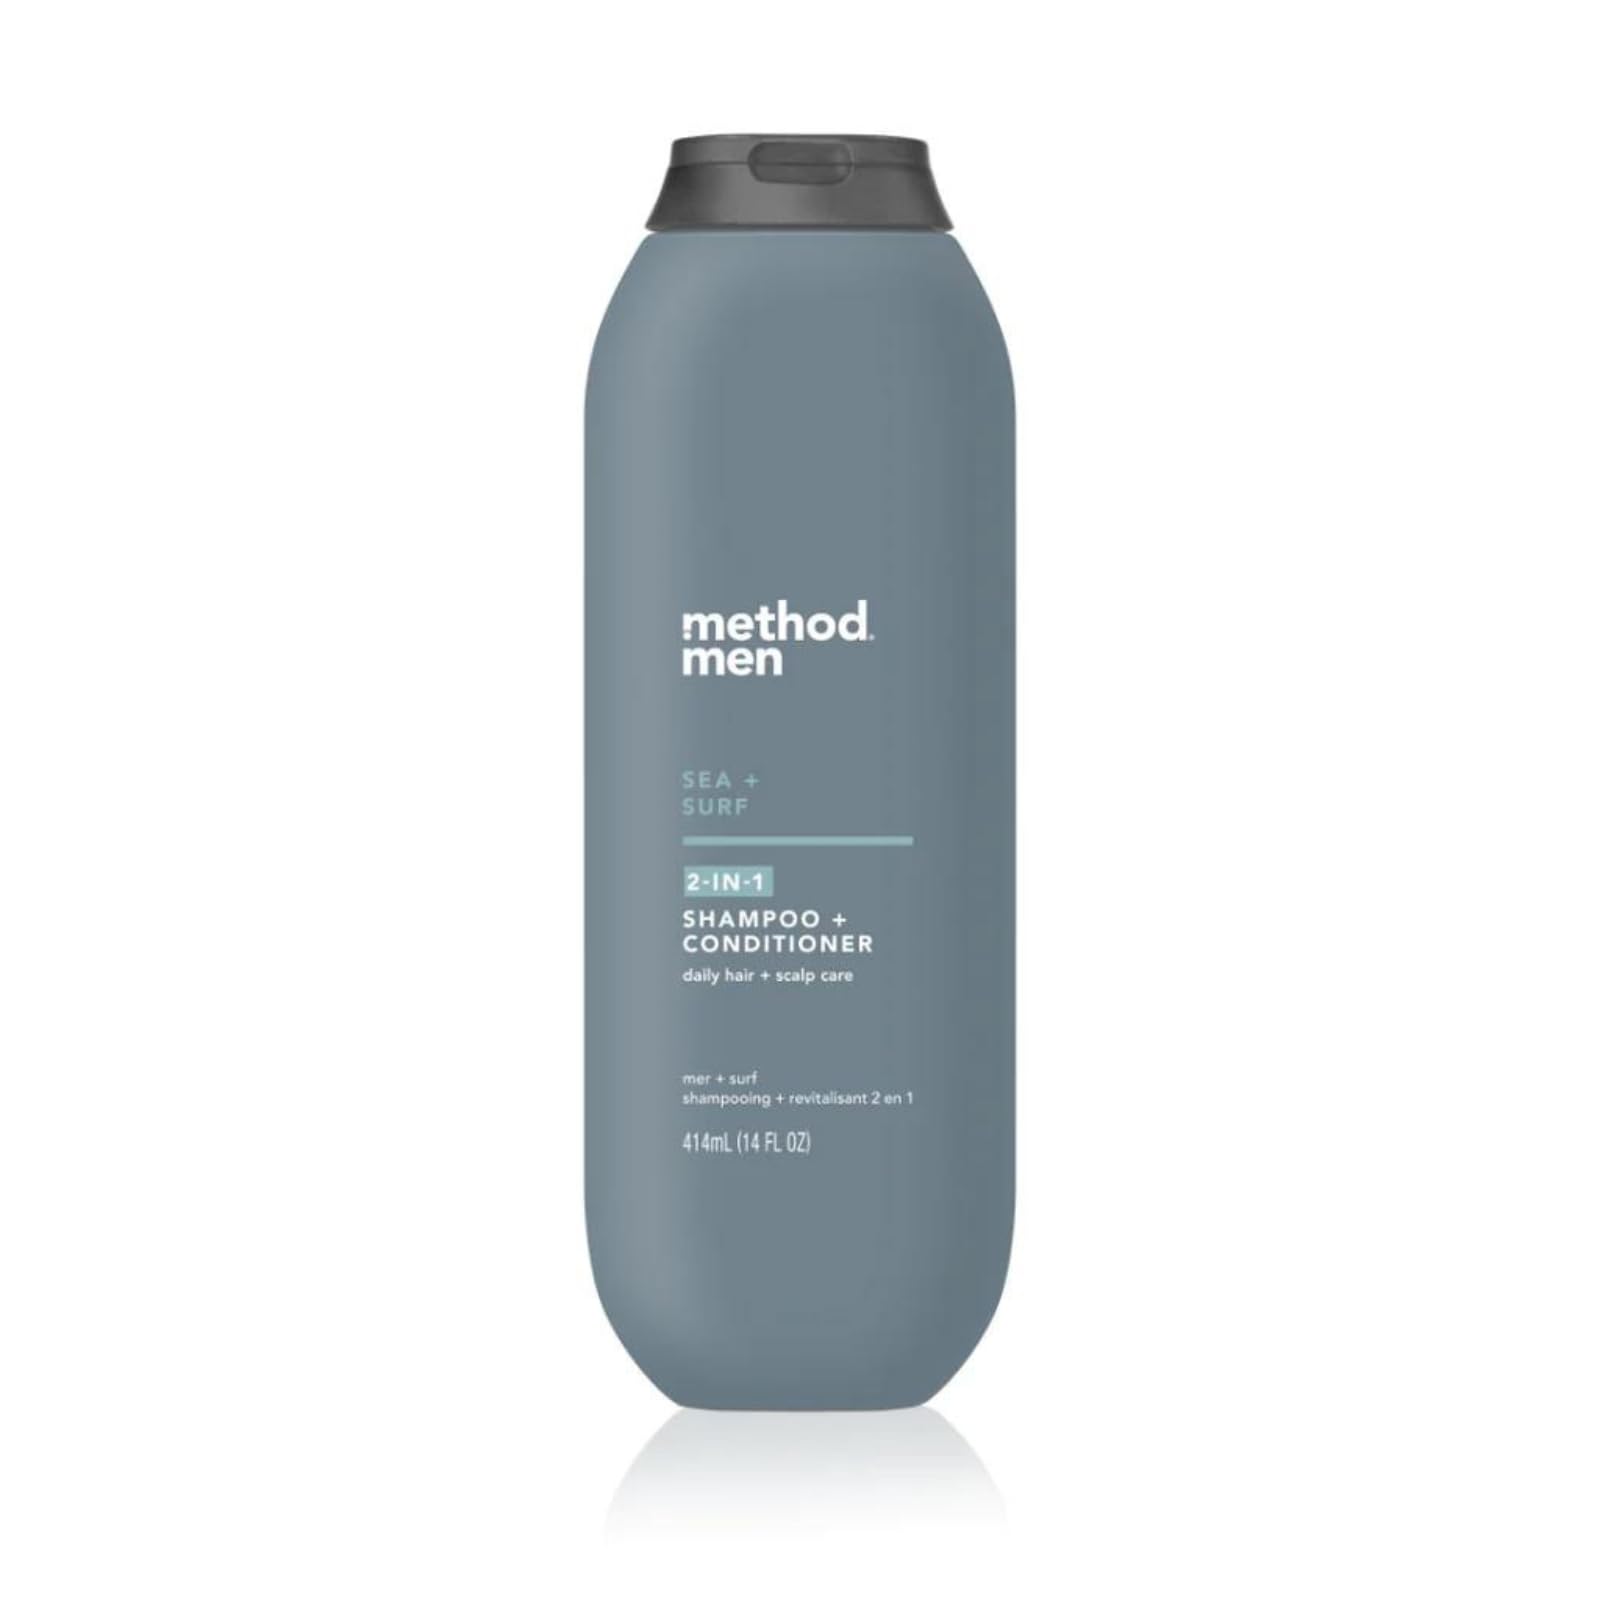 Method Men 2-in-1 Shampoo + Condtioner, Sea + Surf, Paraben and Phthalate Free, 14 fl oz (Pack of 1)